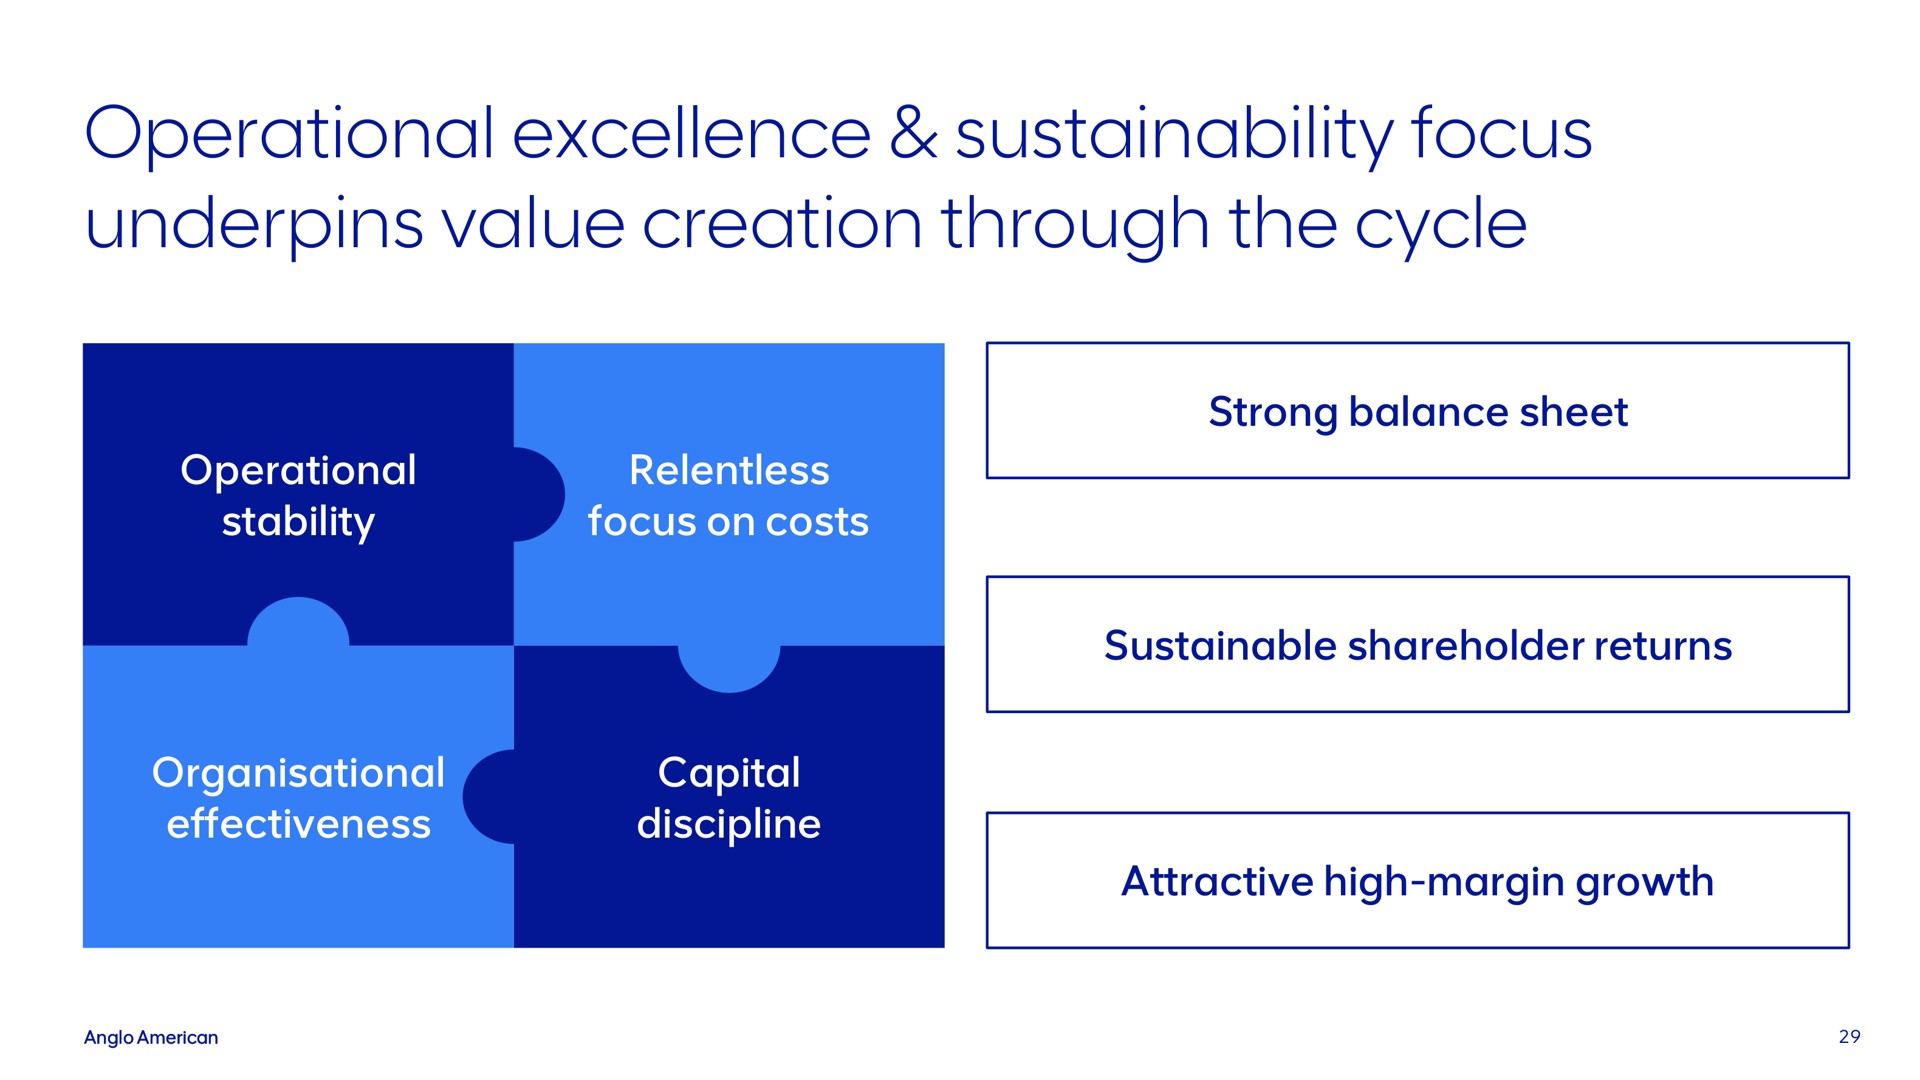 operational excellence focus underpins value creation through the cycle | AngloAmerican